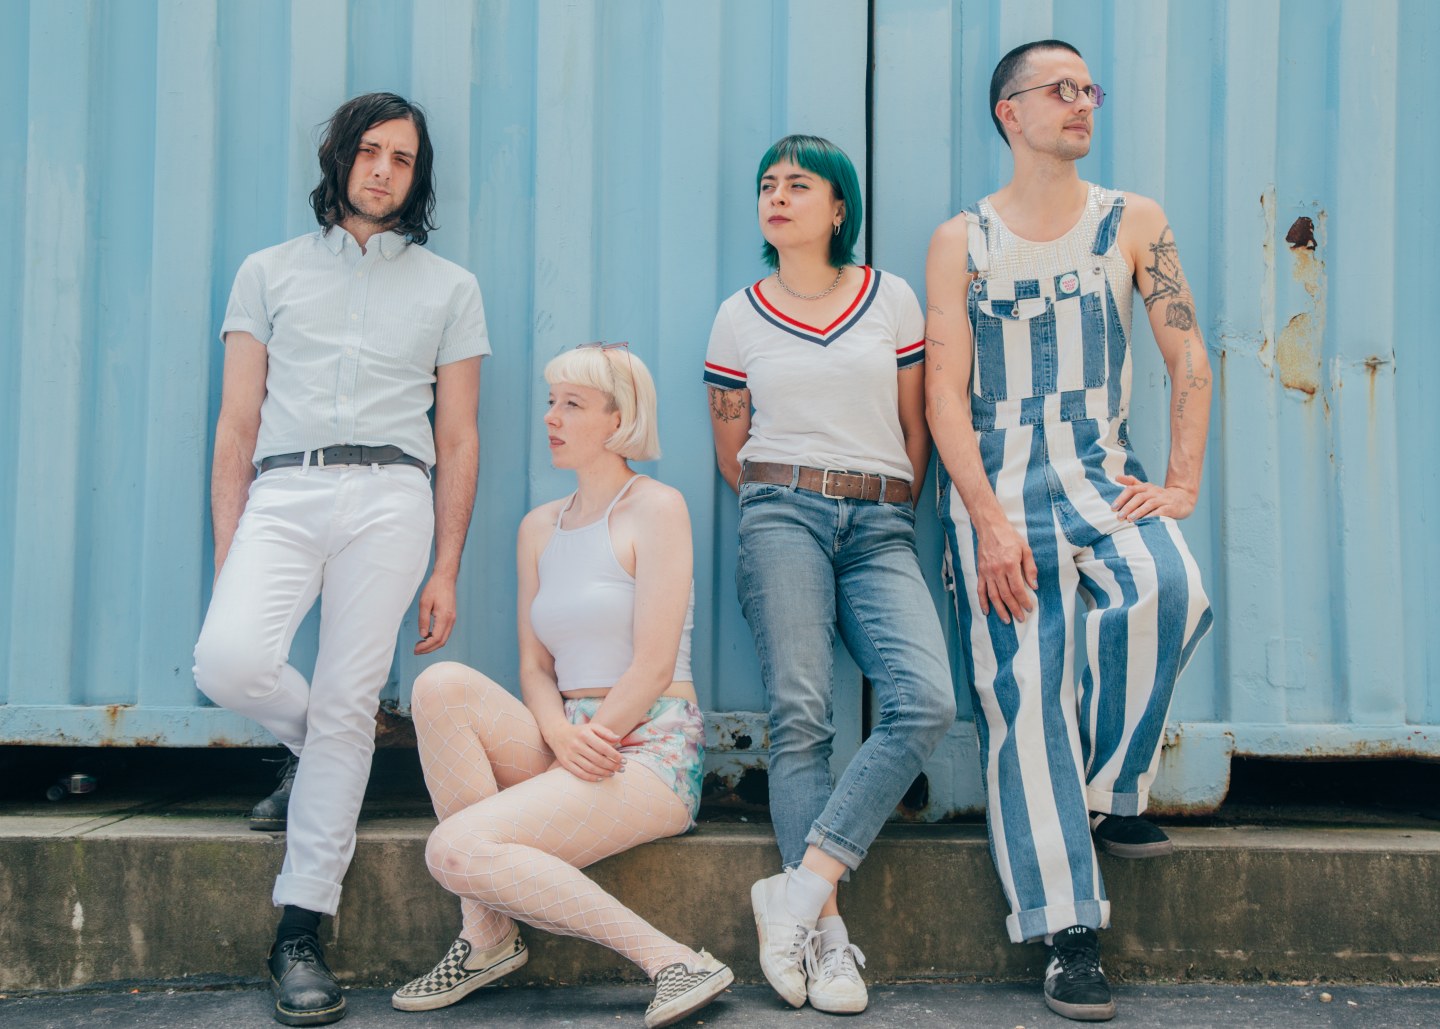 What makes Dilly Dally’s return so sweet is them